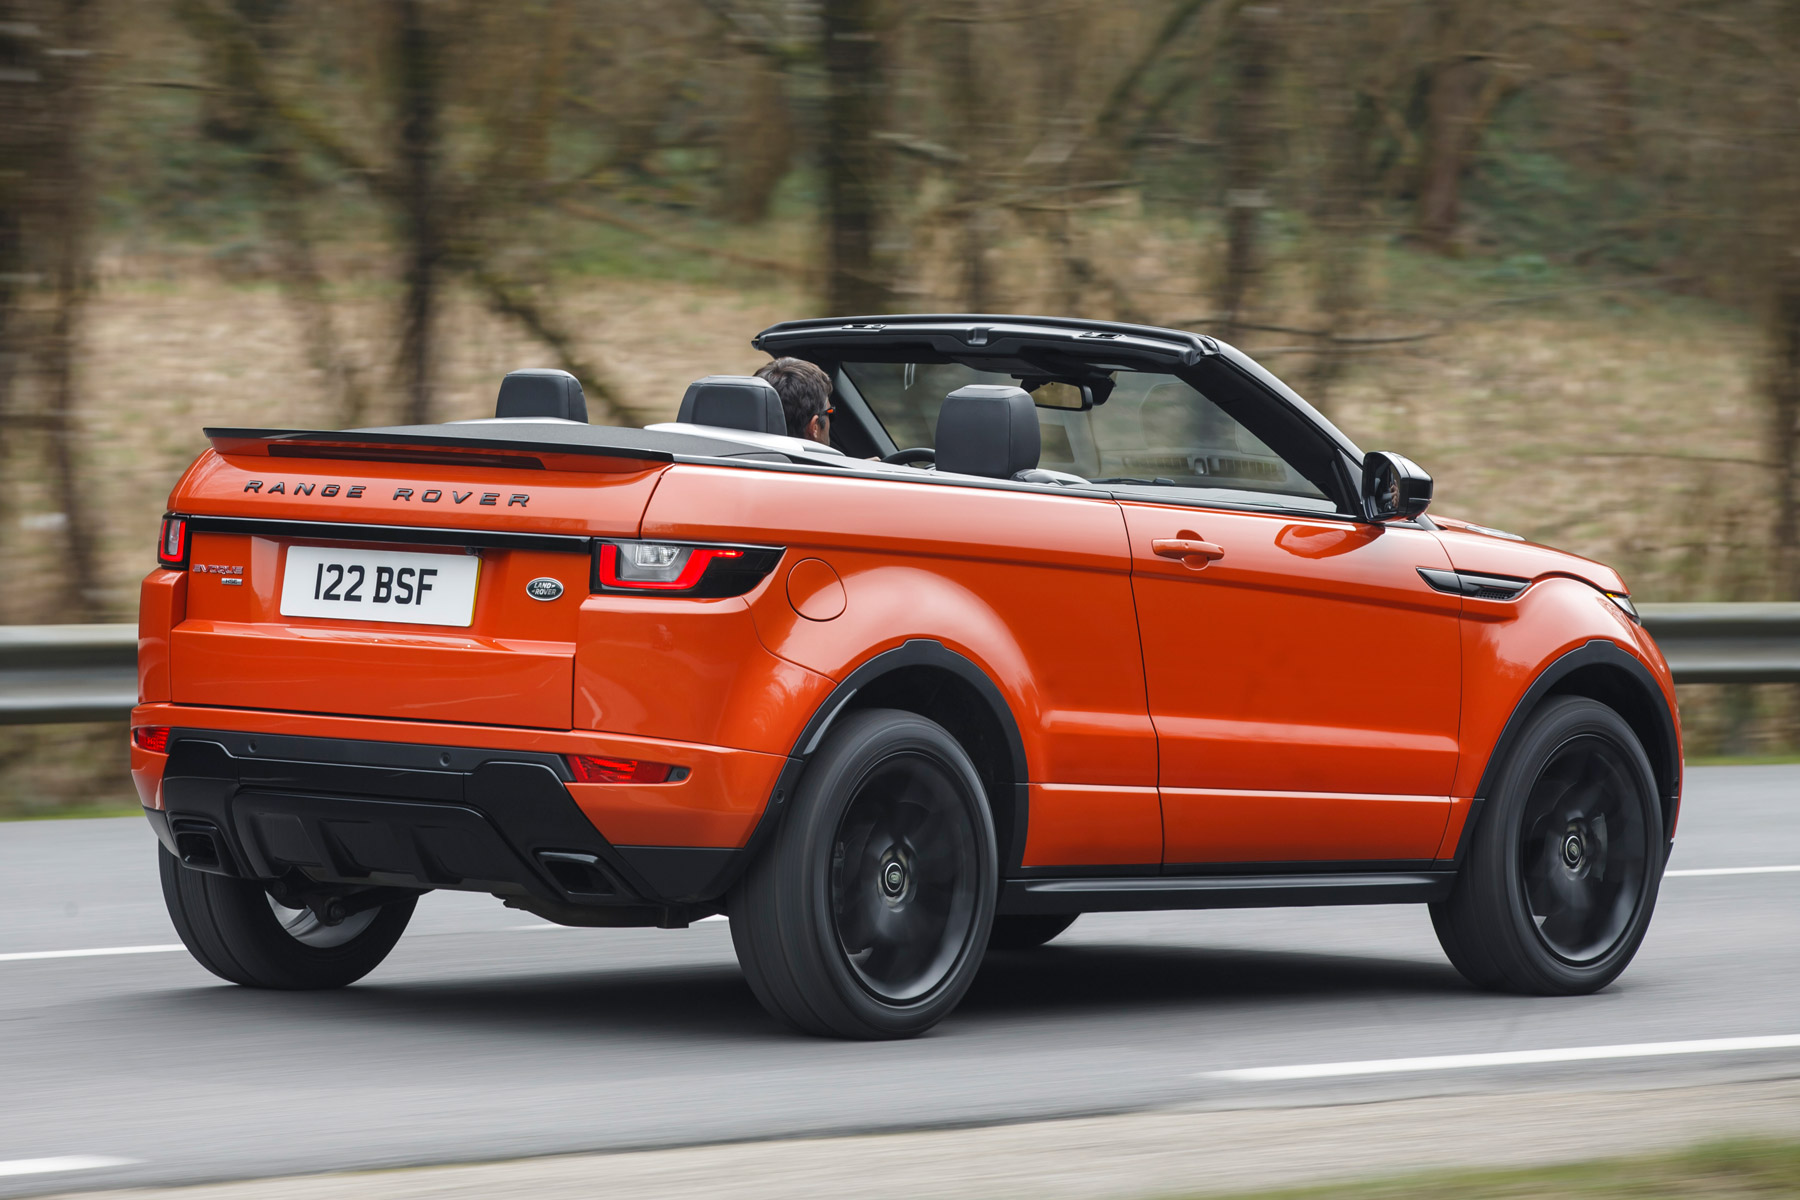 2016 Range Rover Evoque Convertible review: first drive